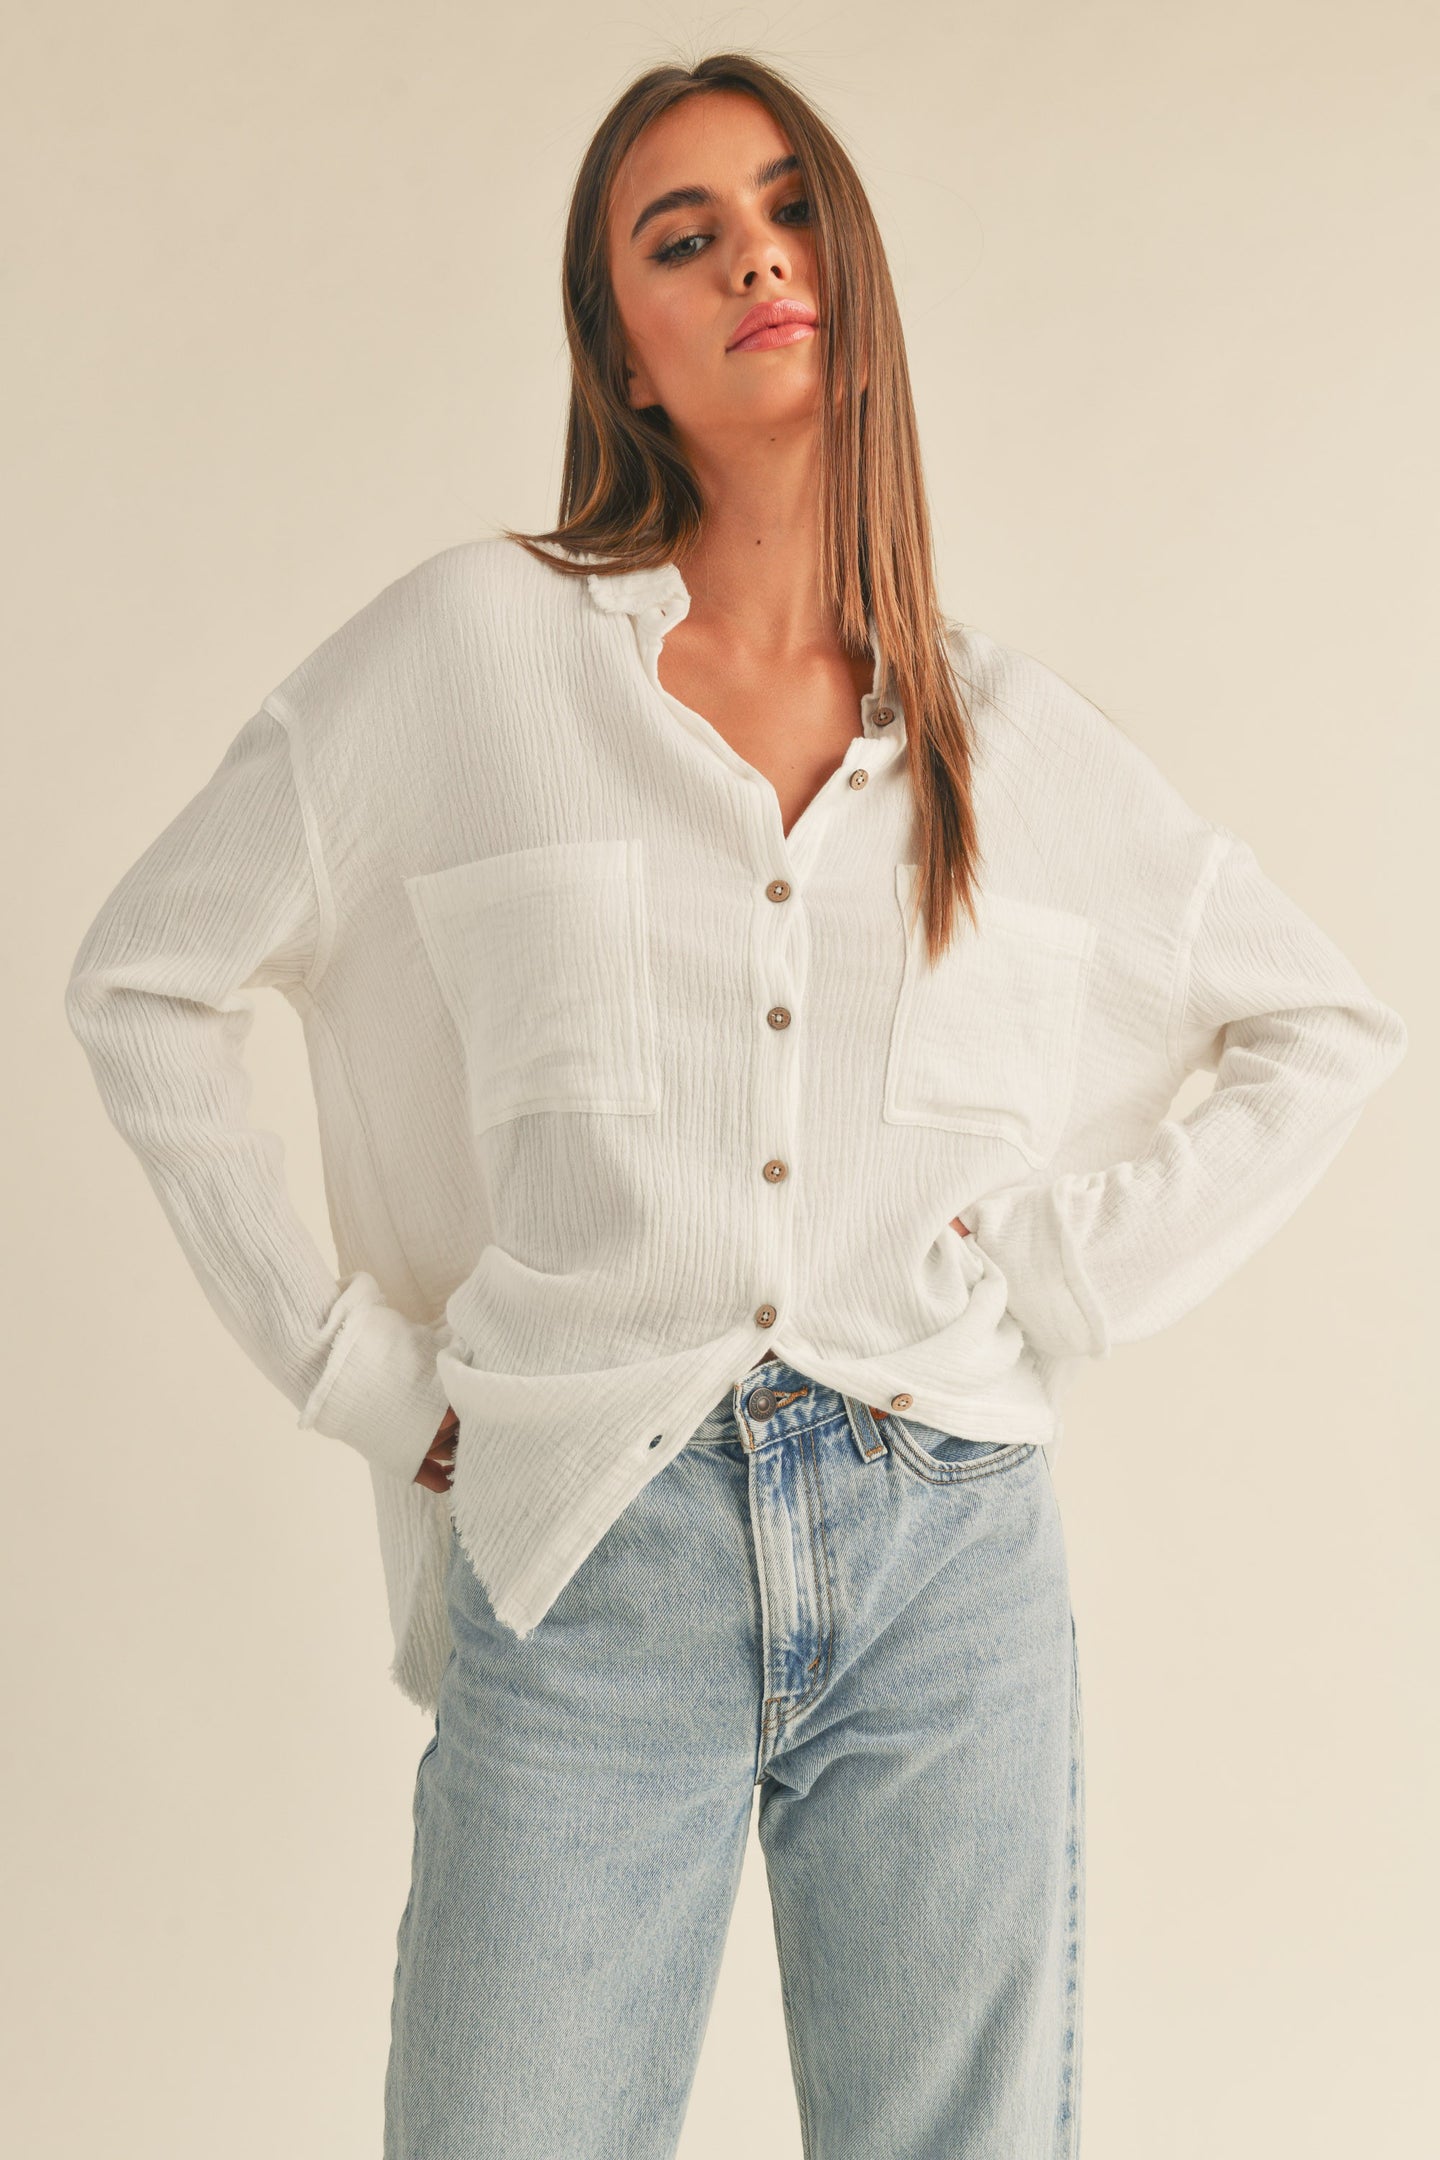 Fleur Double Gauze Relaxed Long Sleeve Button Up Shirt - White